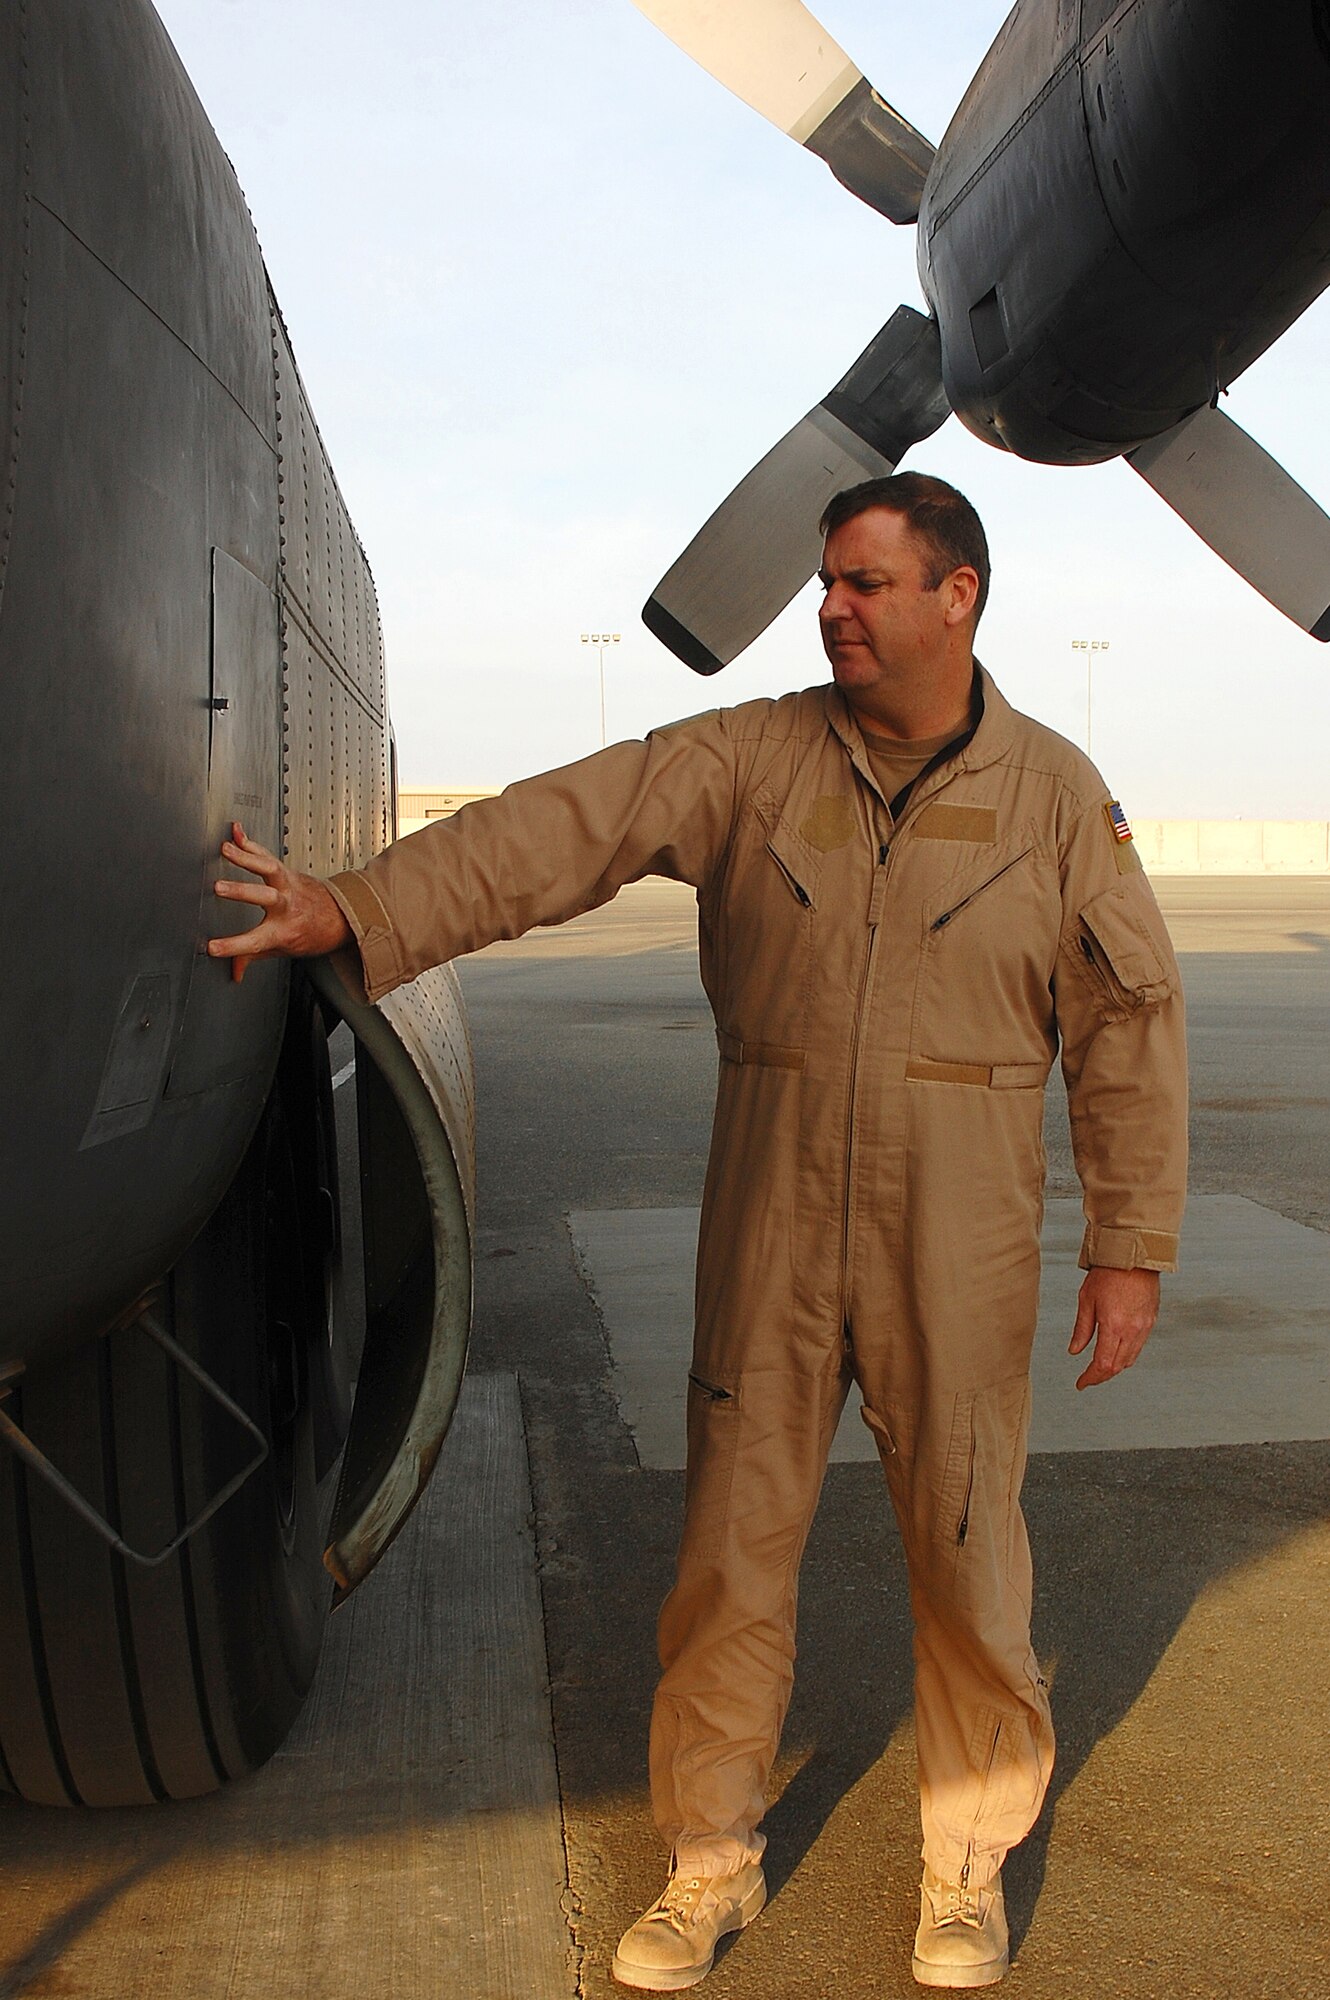 SOUTHWEST ASIA -- Master Sgt. Anthony Roy conducts a preflight inspection on an EC-130H Compass Call aircraft Dec. 8 here.  Sergeant Roy is an instructor flight engineer with the 43rd Expeditionary Electronic Combat Squadron and is deployed from Davis-Monthan AFB., Ariz.  (U.S. Air Force photo/Staff Sgt. Tia Schroeder)